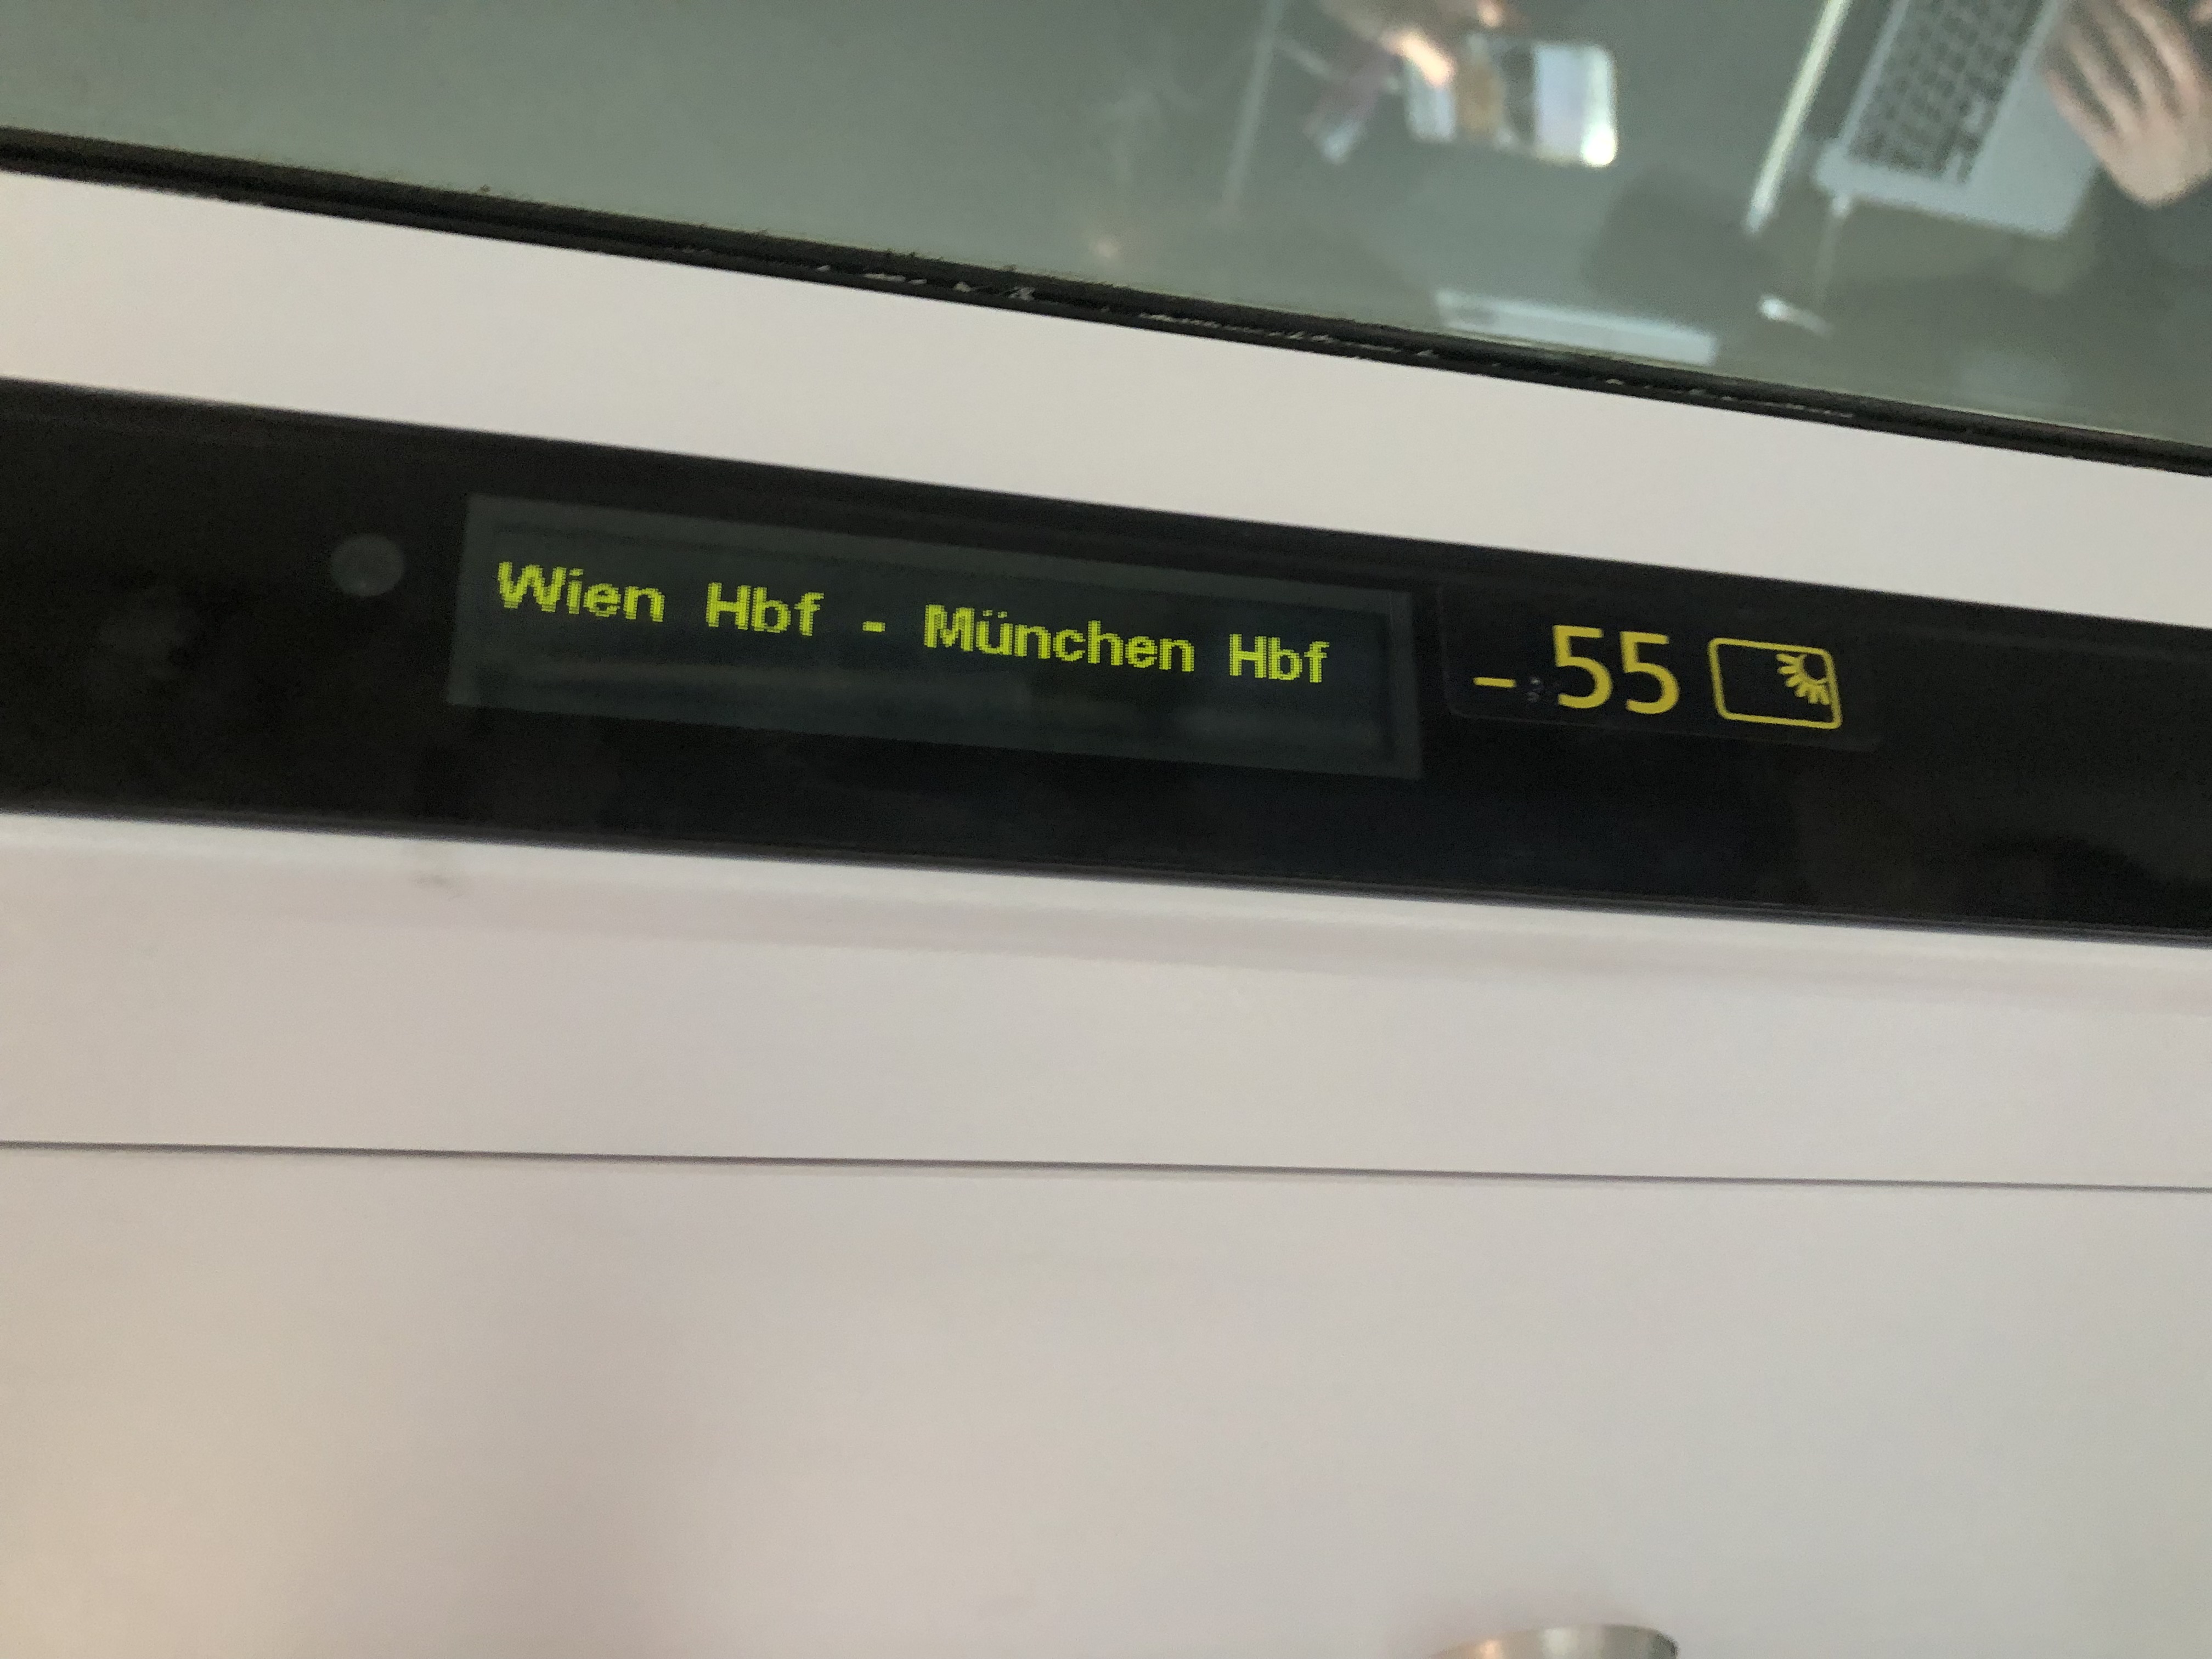 a digital display on a white surface